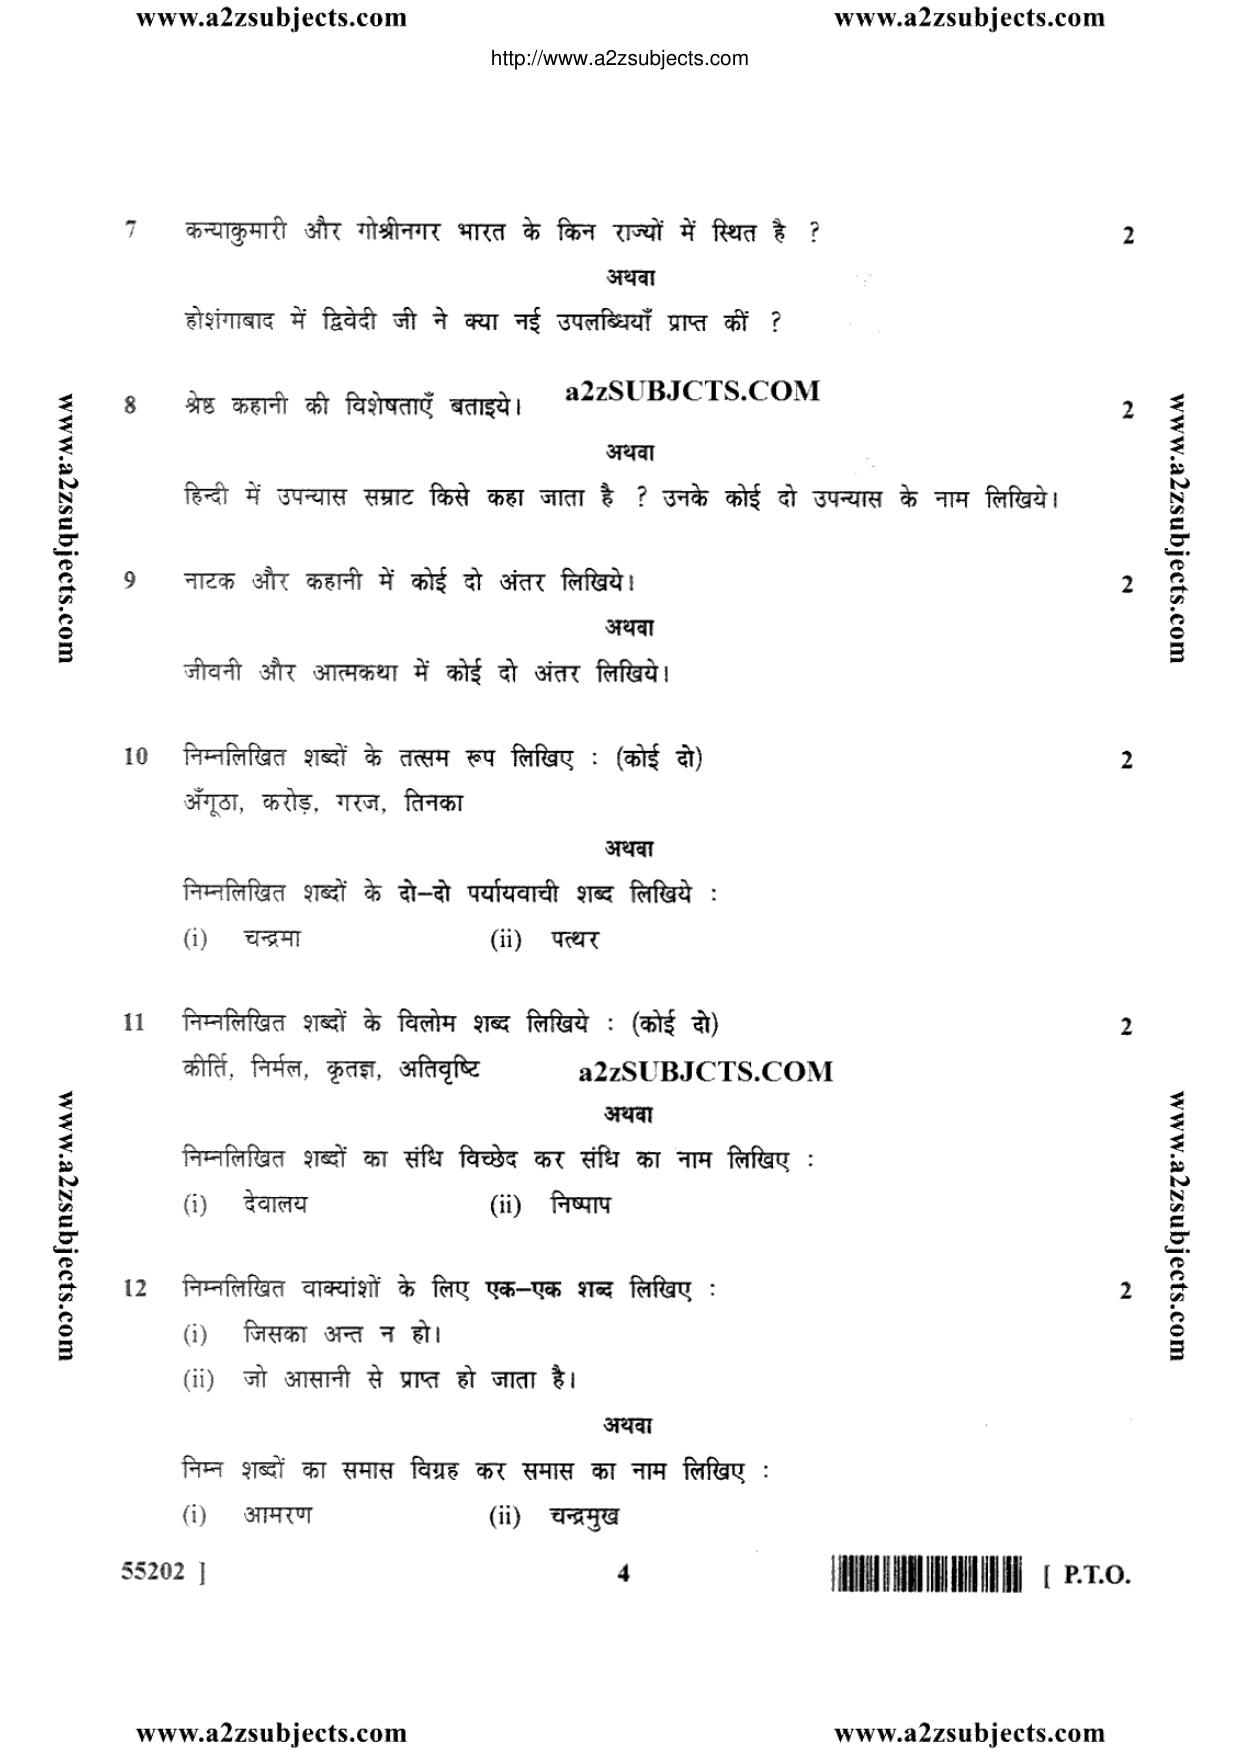 MP Board Class 10 Marathi 2017 Question Paper - Page 4